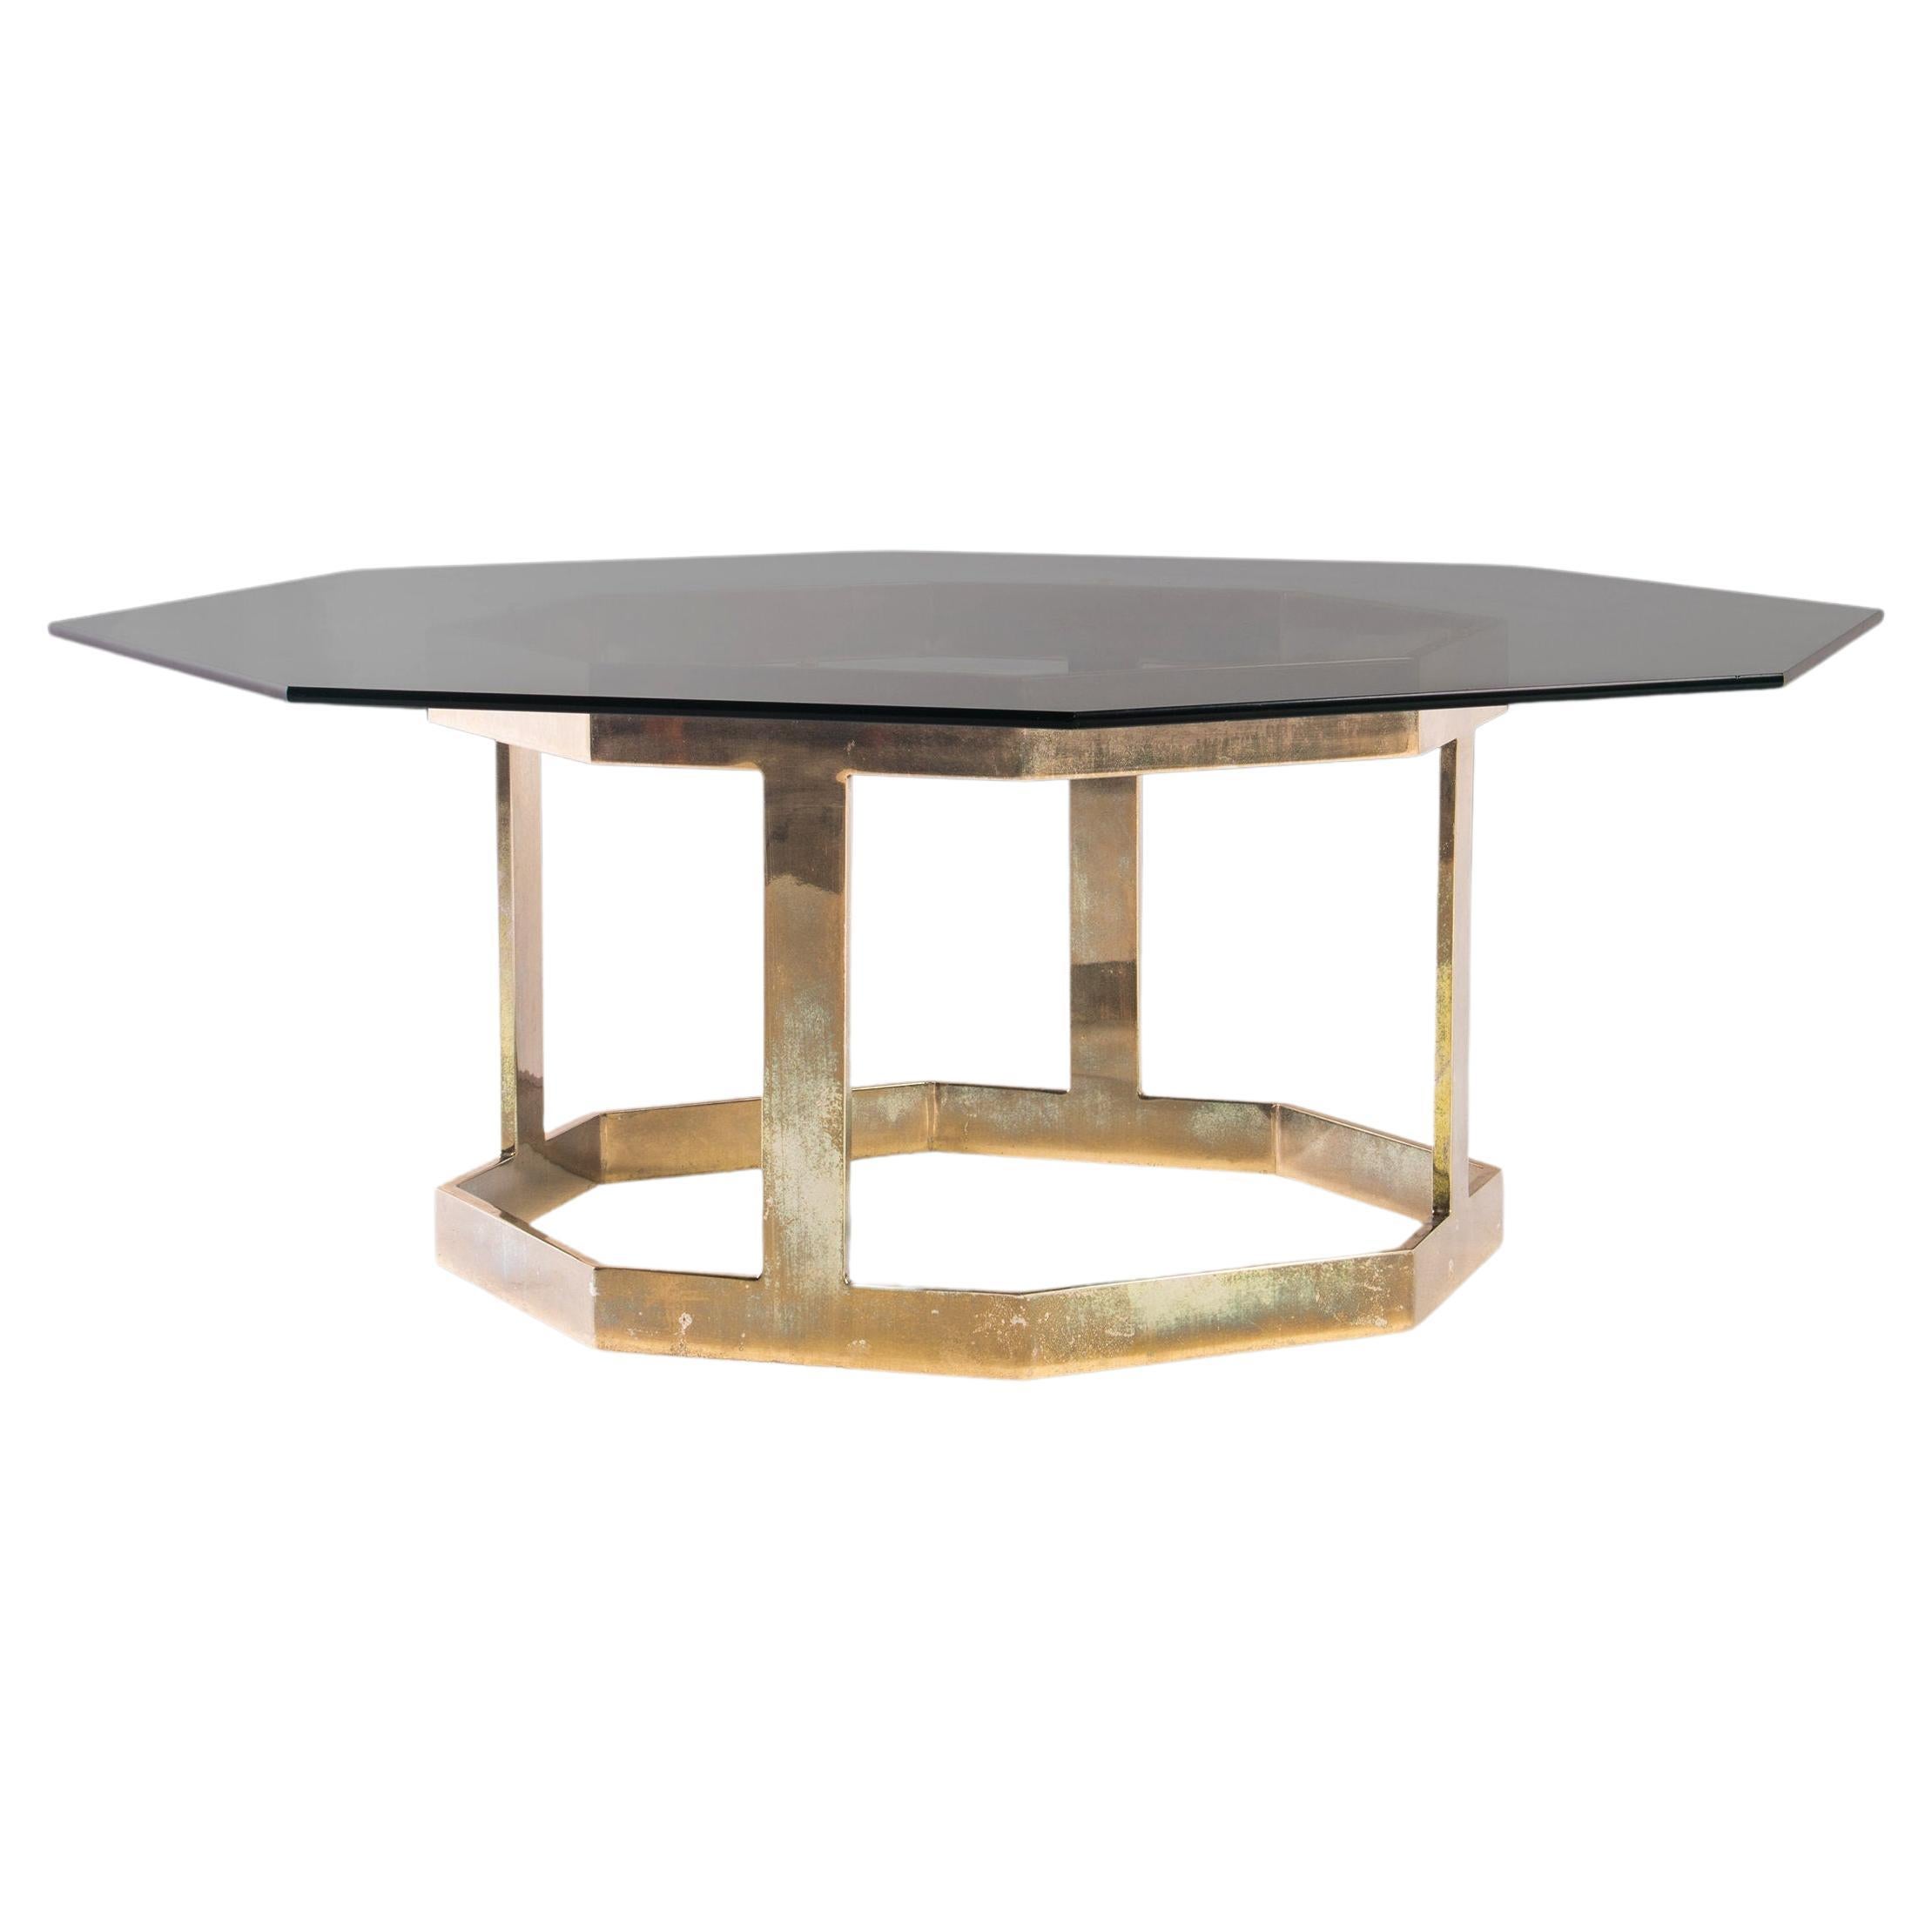 Patinaed Brass Octagonal Coffee / Cocktail Table After Milo Baughman, c. 1970s